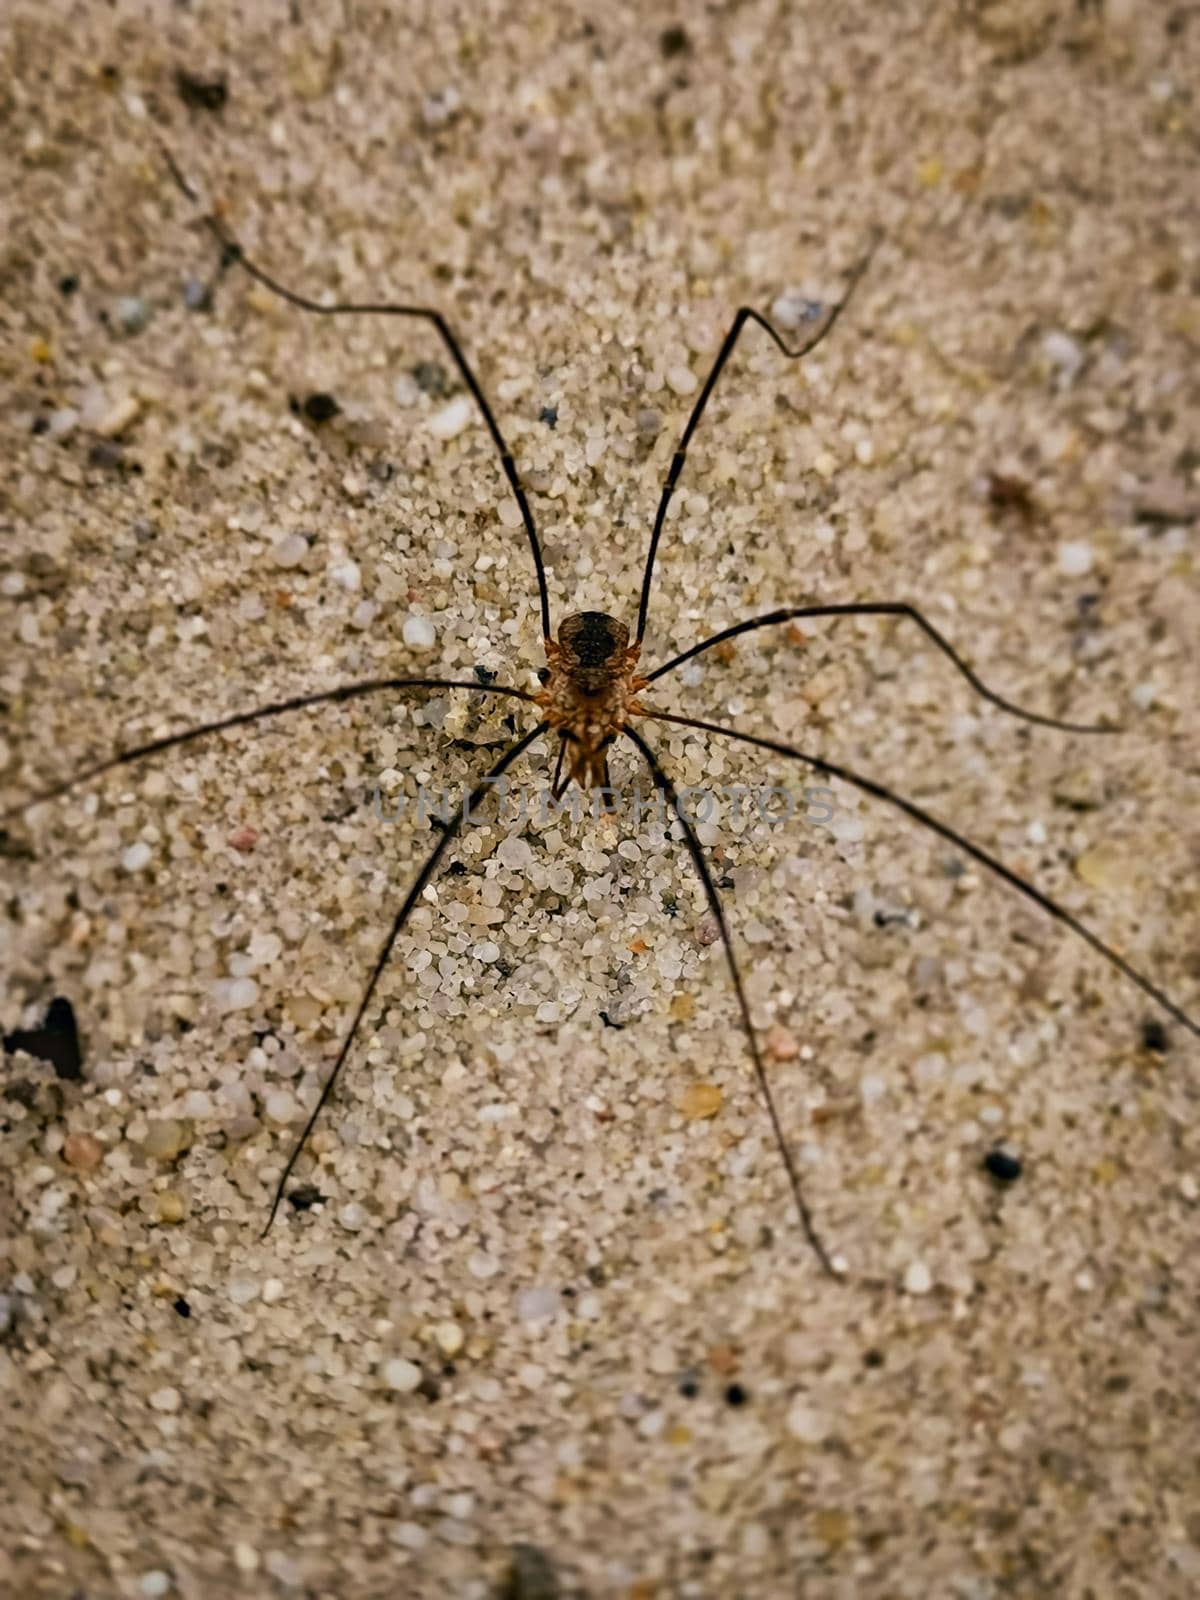 High angle vertical shot of a creepy long-legged spider on a sandy surface